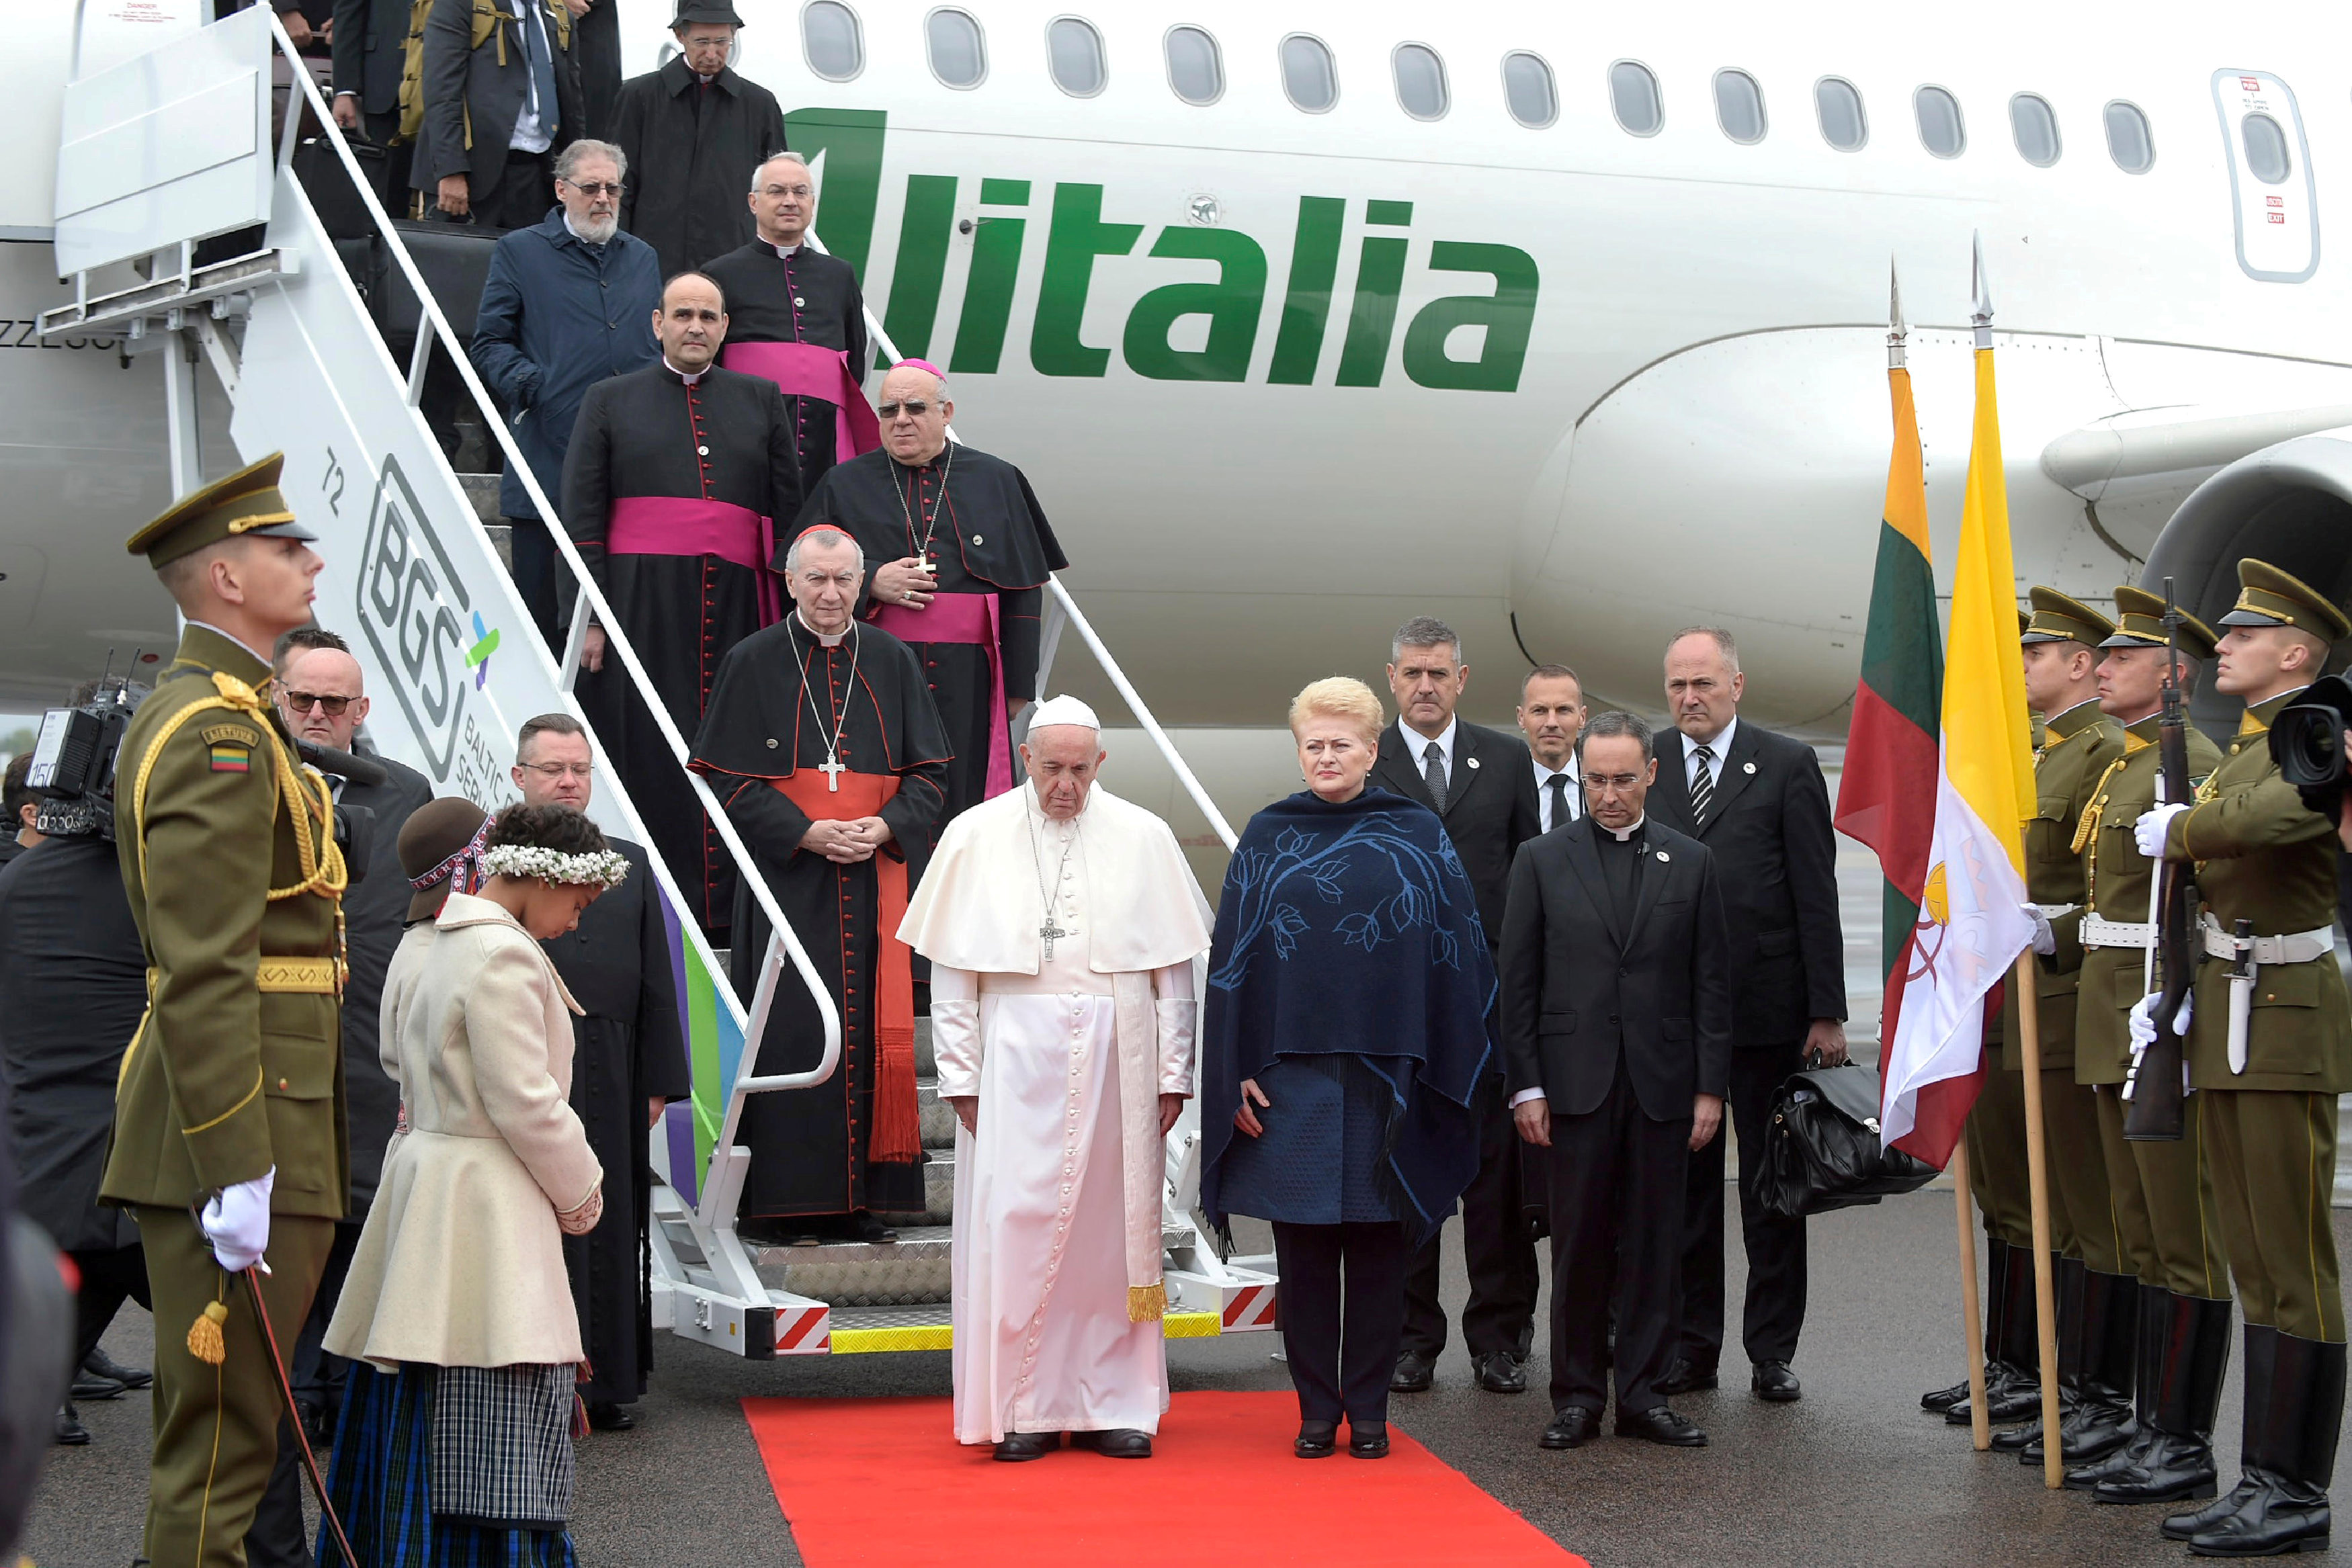 2018-09-22T093918Z_1323504592_RC1EA45D4C10_RTRMADP_3_POPE-BALTIC-LITHUANIA-WELCOME